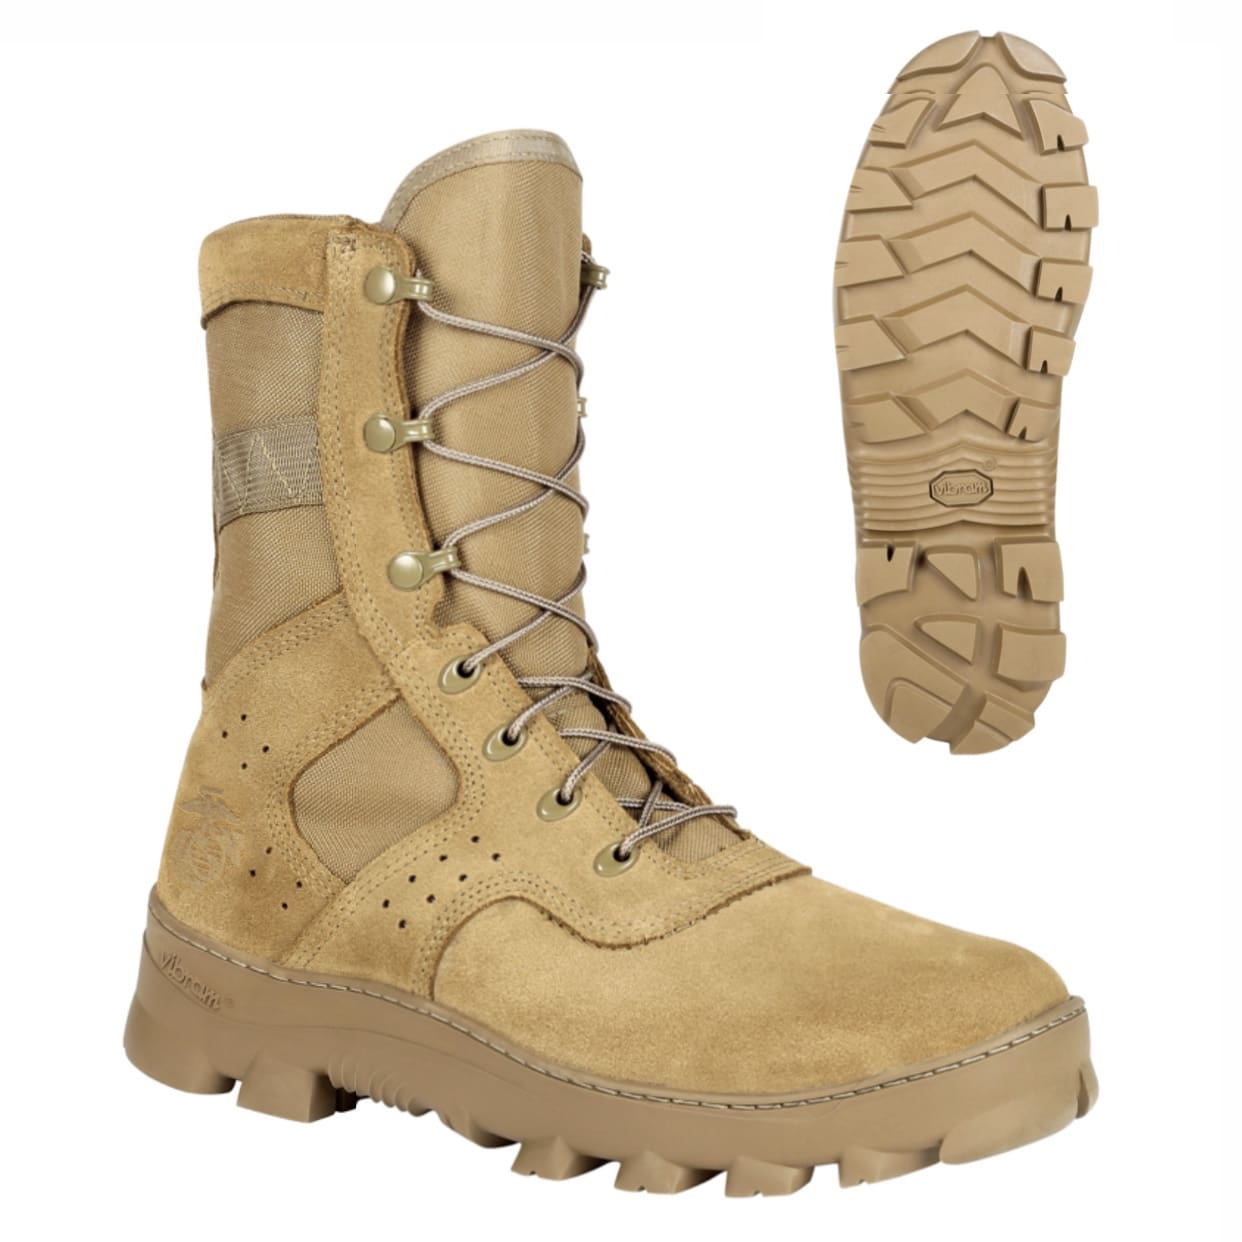 Rocky's USMC Jungle Boot Now Available 